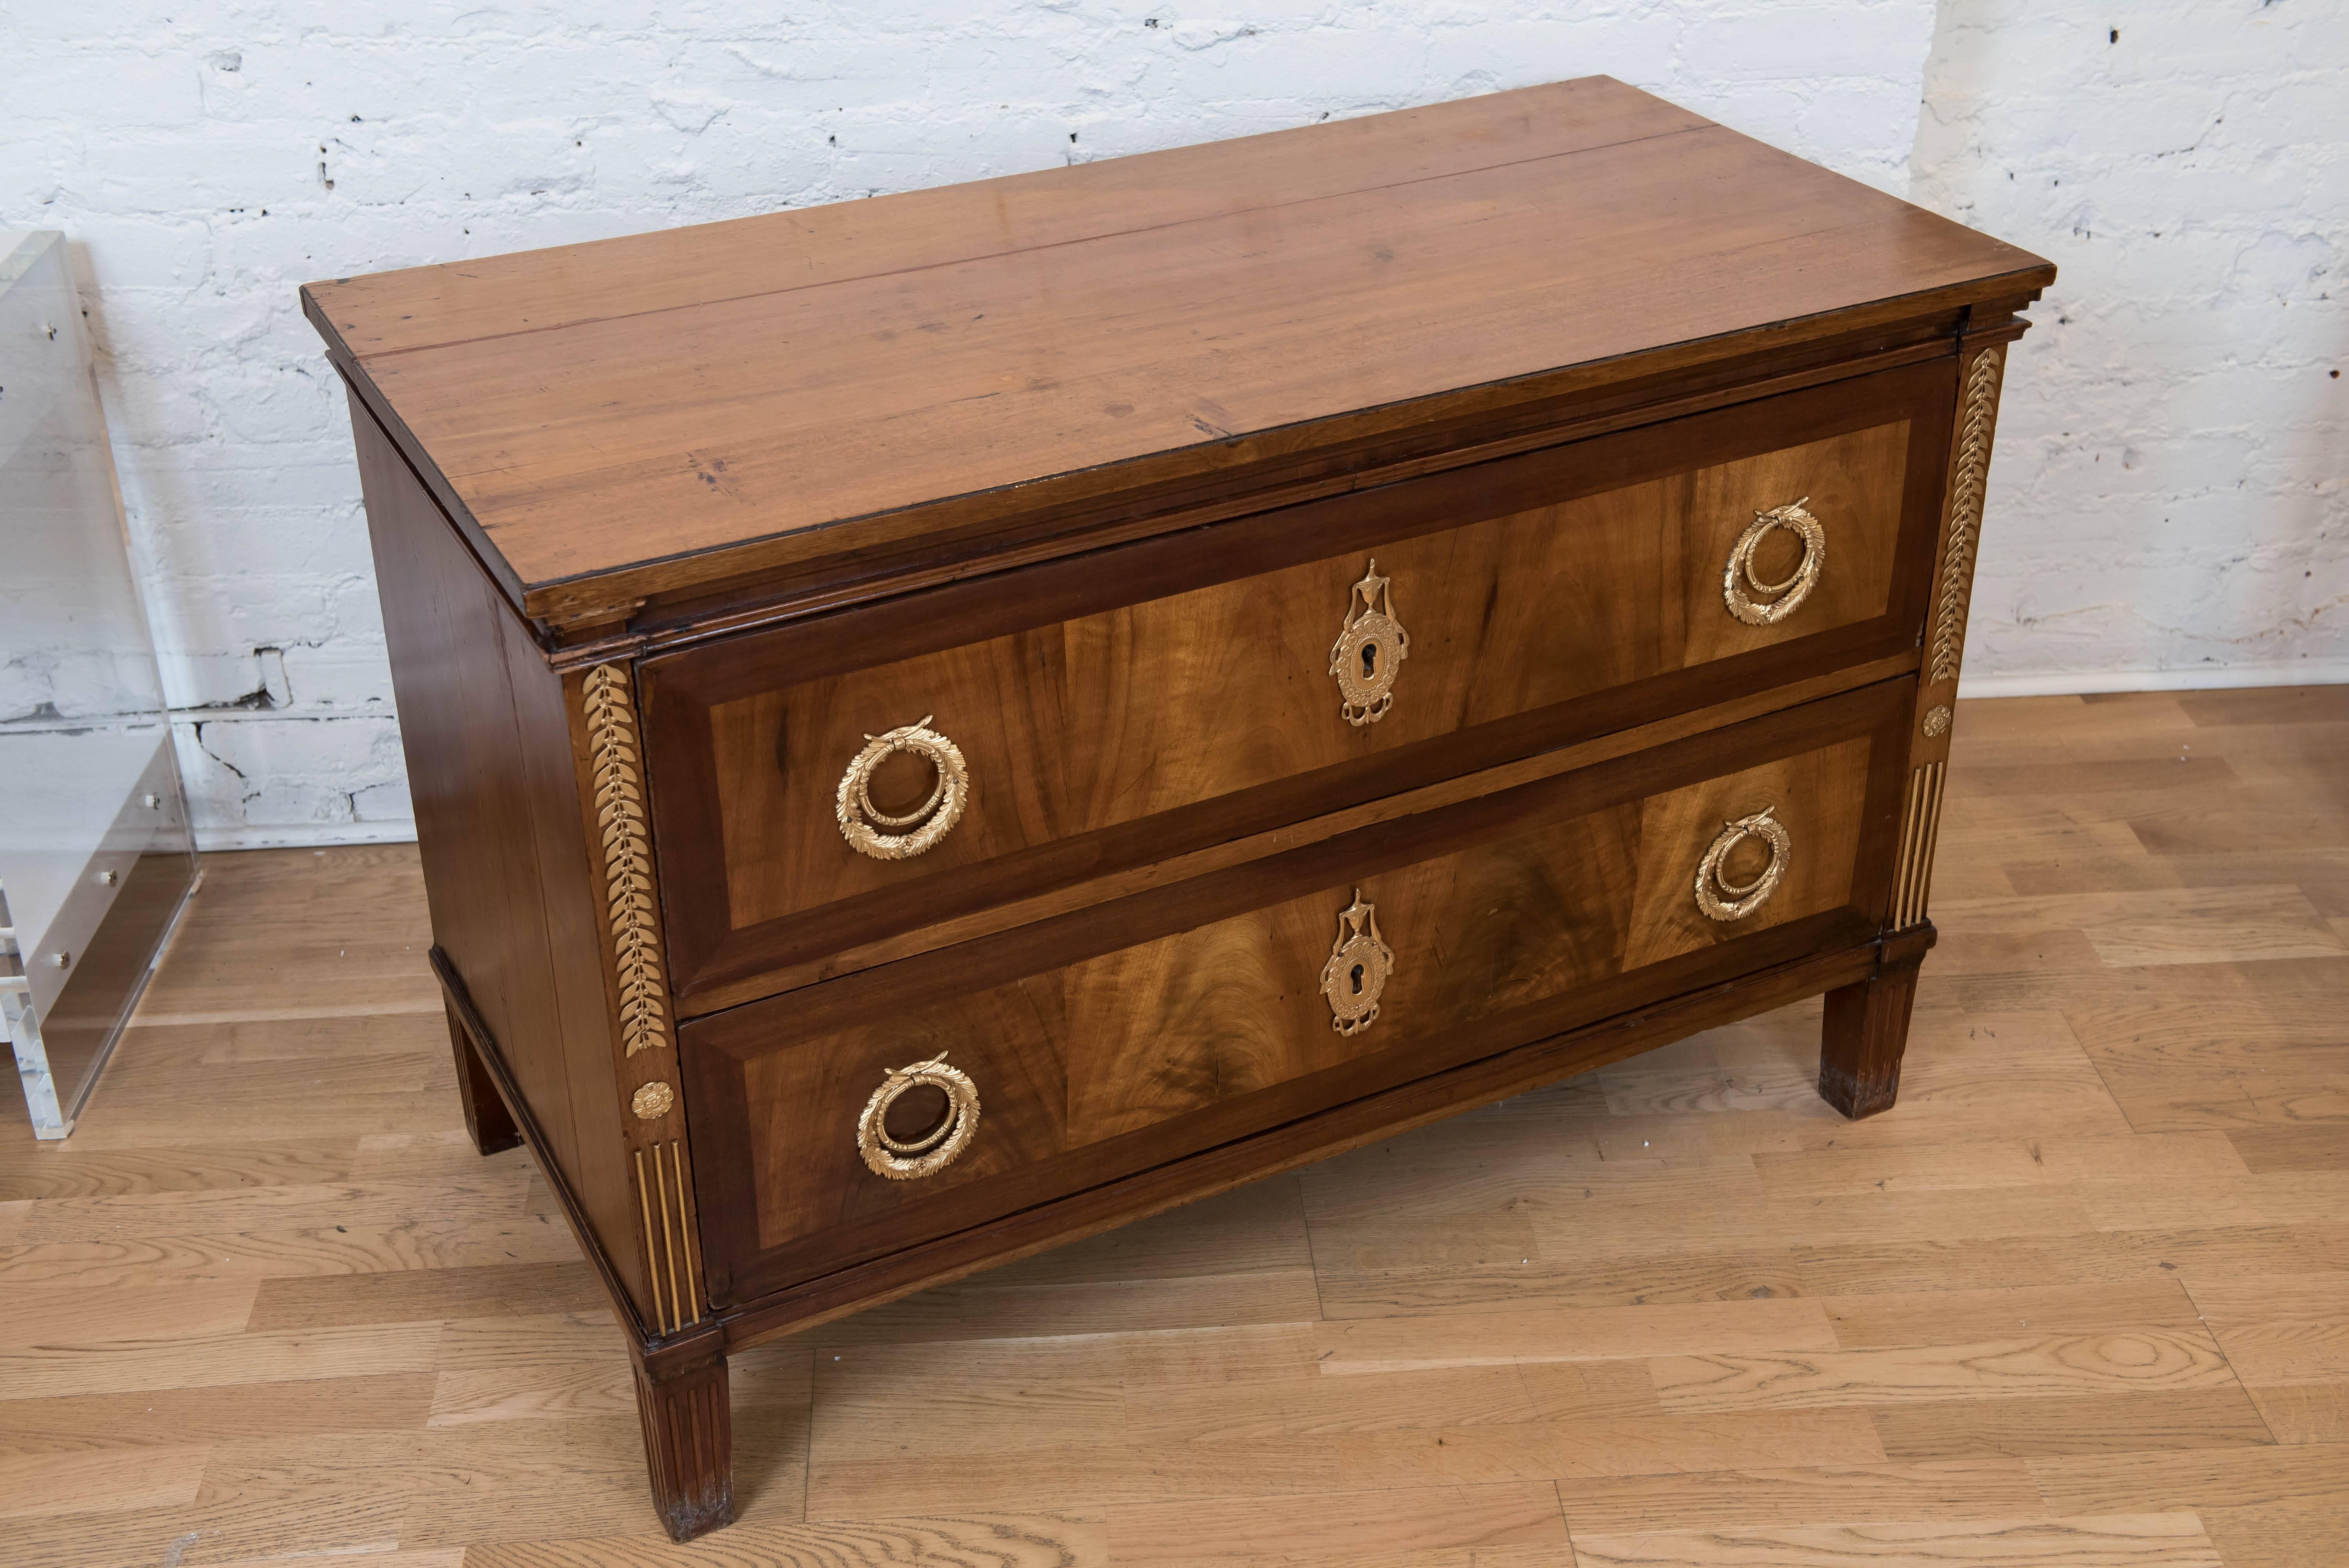 This sumptuous and nicely designed two-drawer commode with light walnut wood top with
bookmatched veneer fronts over a pine structure is adorned with decorative gilt bronze
handles, key holes and decorations. Great piece, good lines, interesting